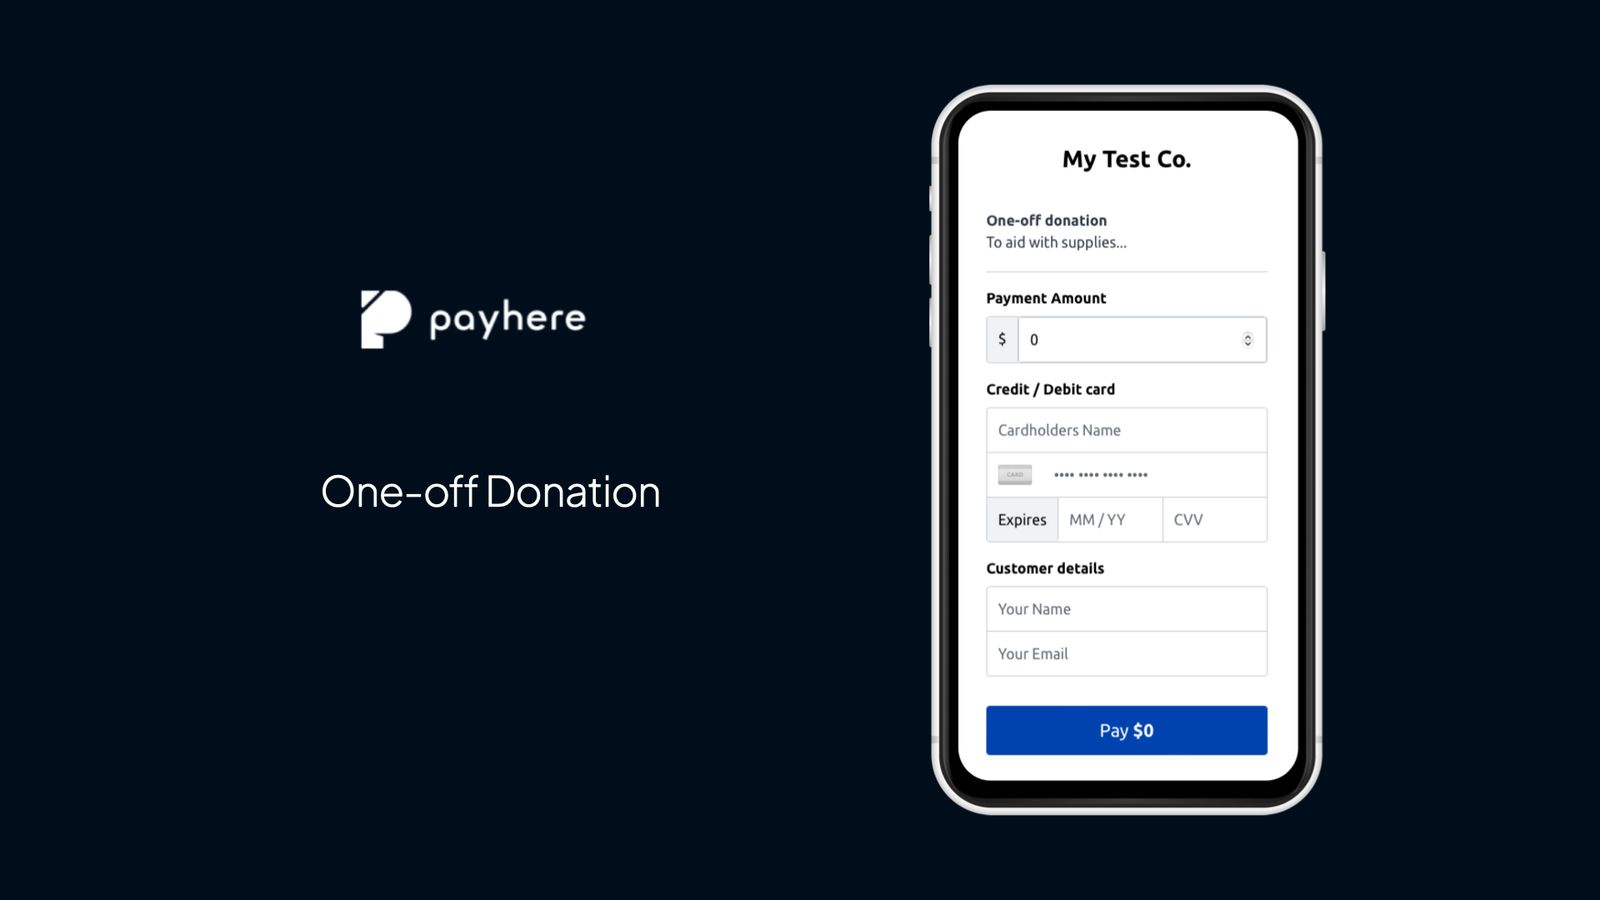 Creating a one-off donation payment link